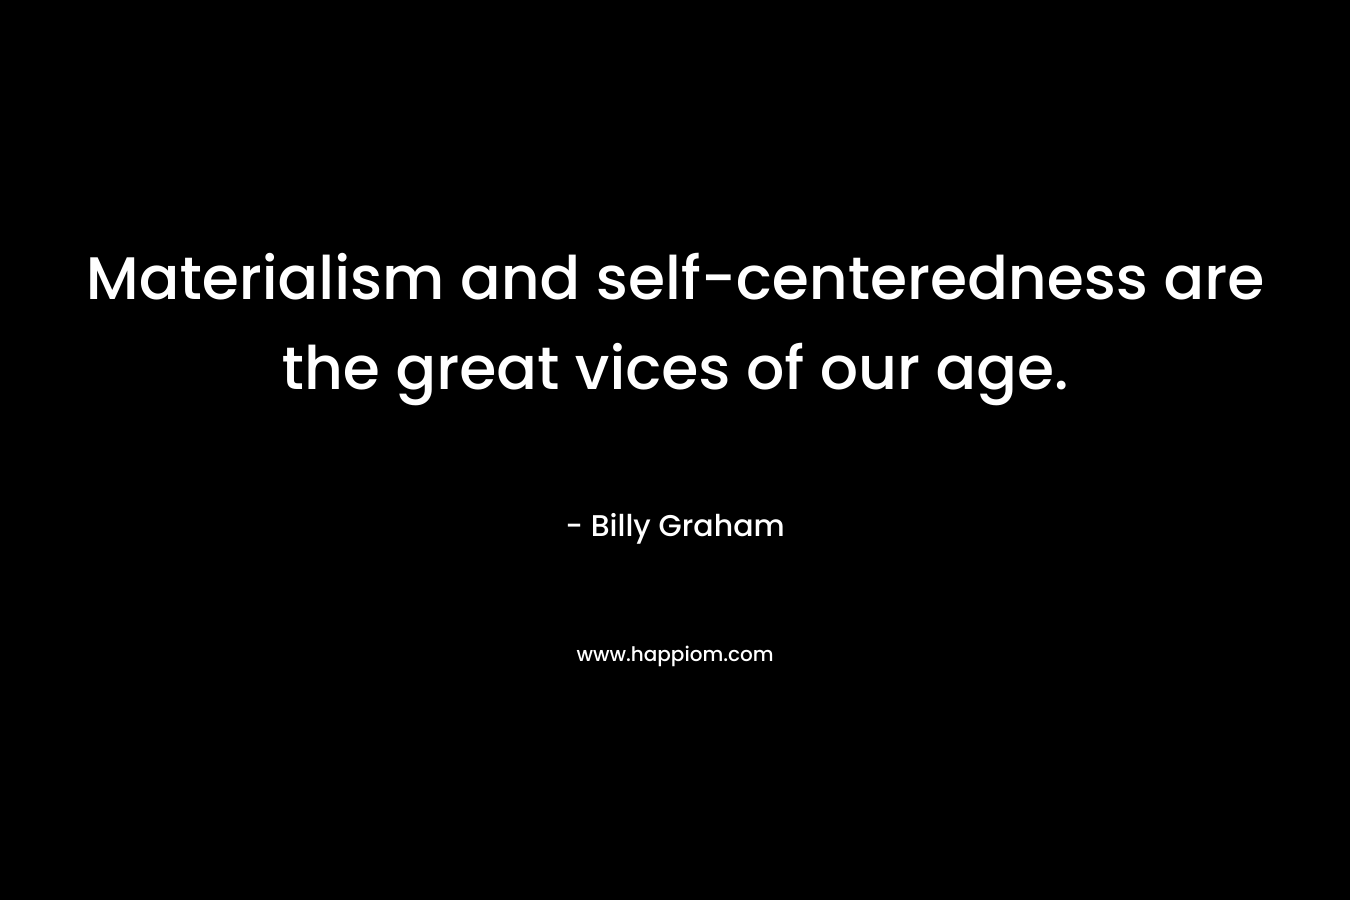 Materialism and self-centeredness are the great vices of our age.